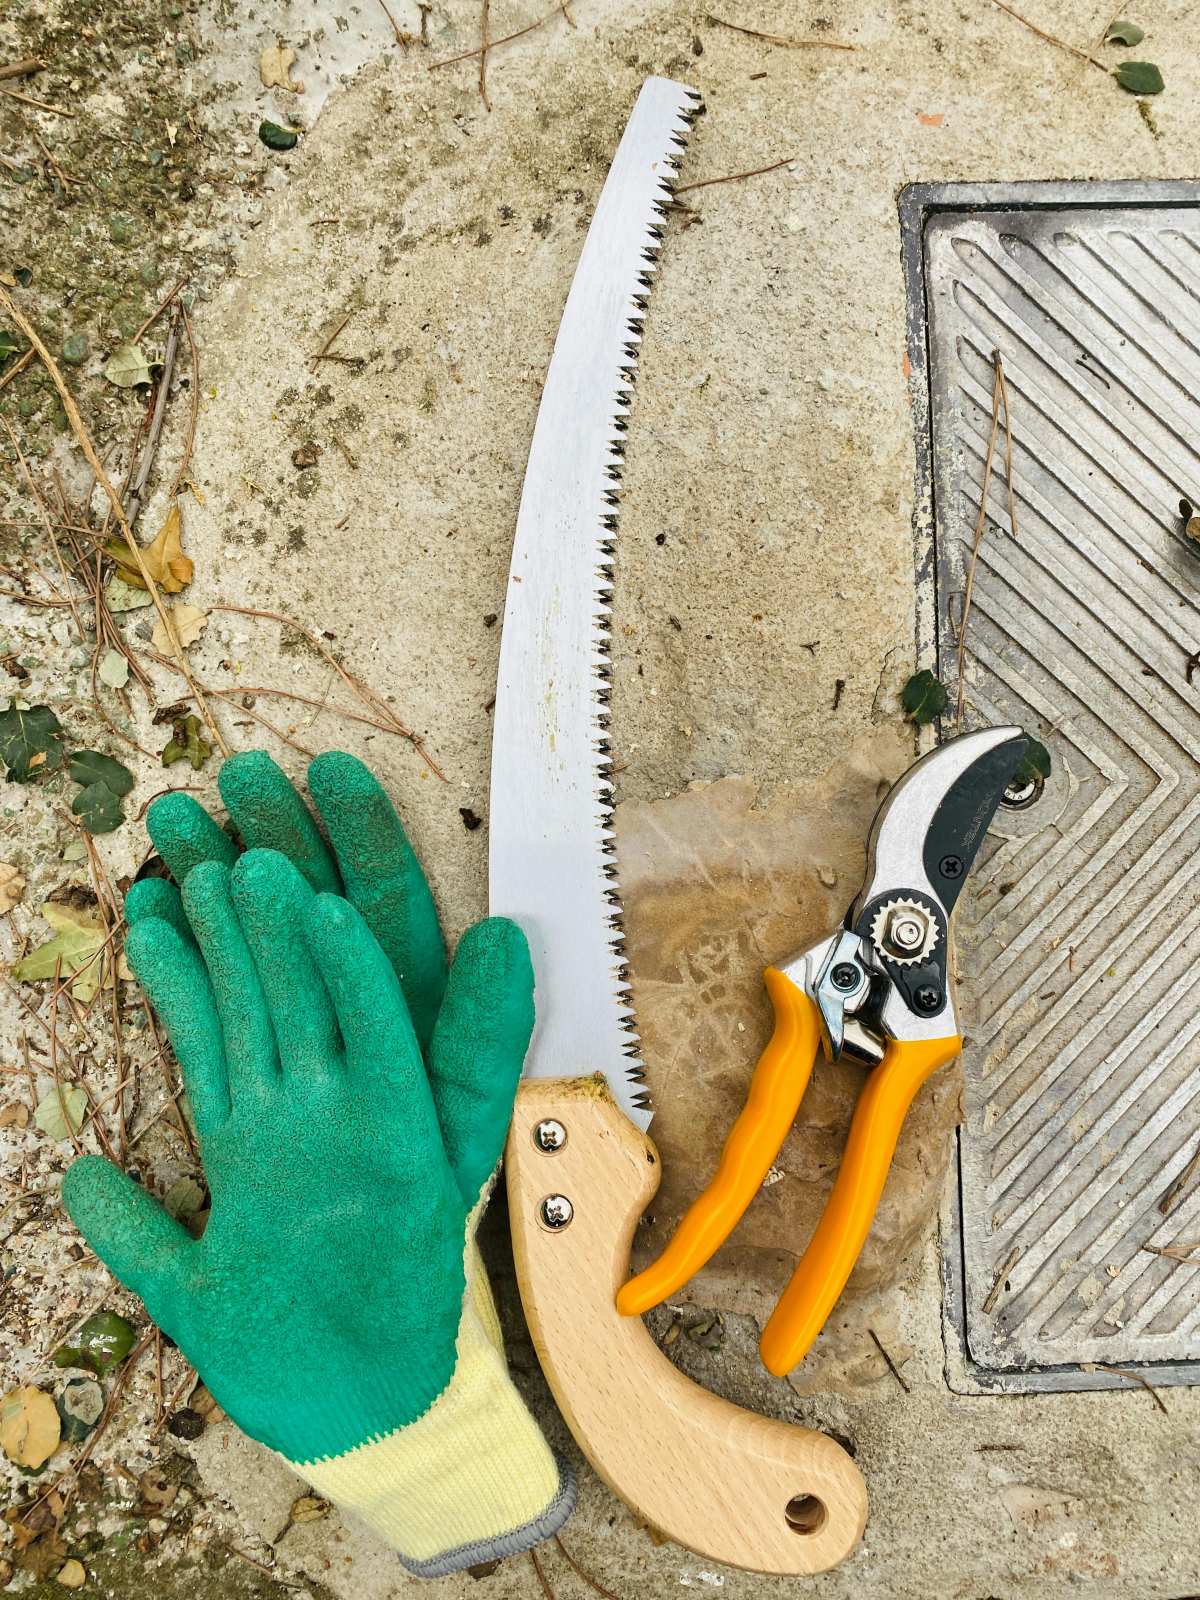 gloves pruning shears